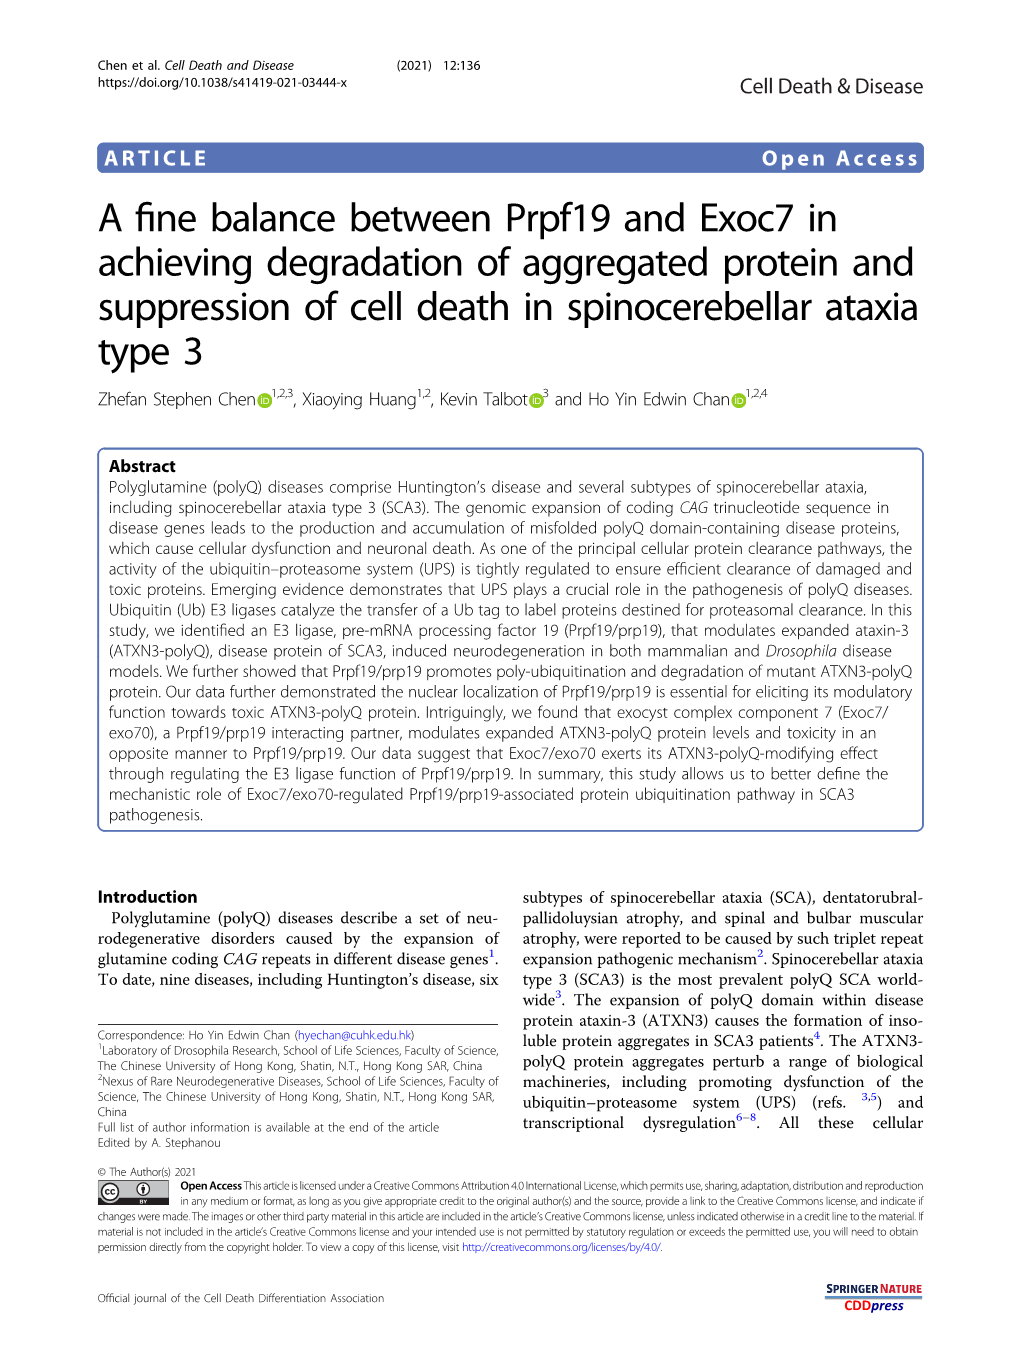 A Fine Balance Between Prpf19 and Exoc7 in Achieving Degradation Of